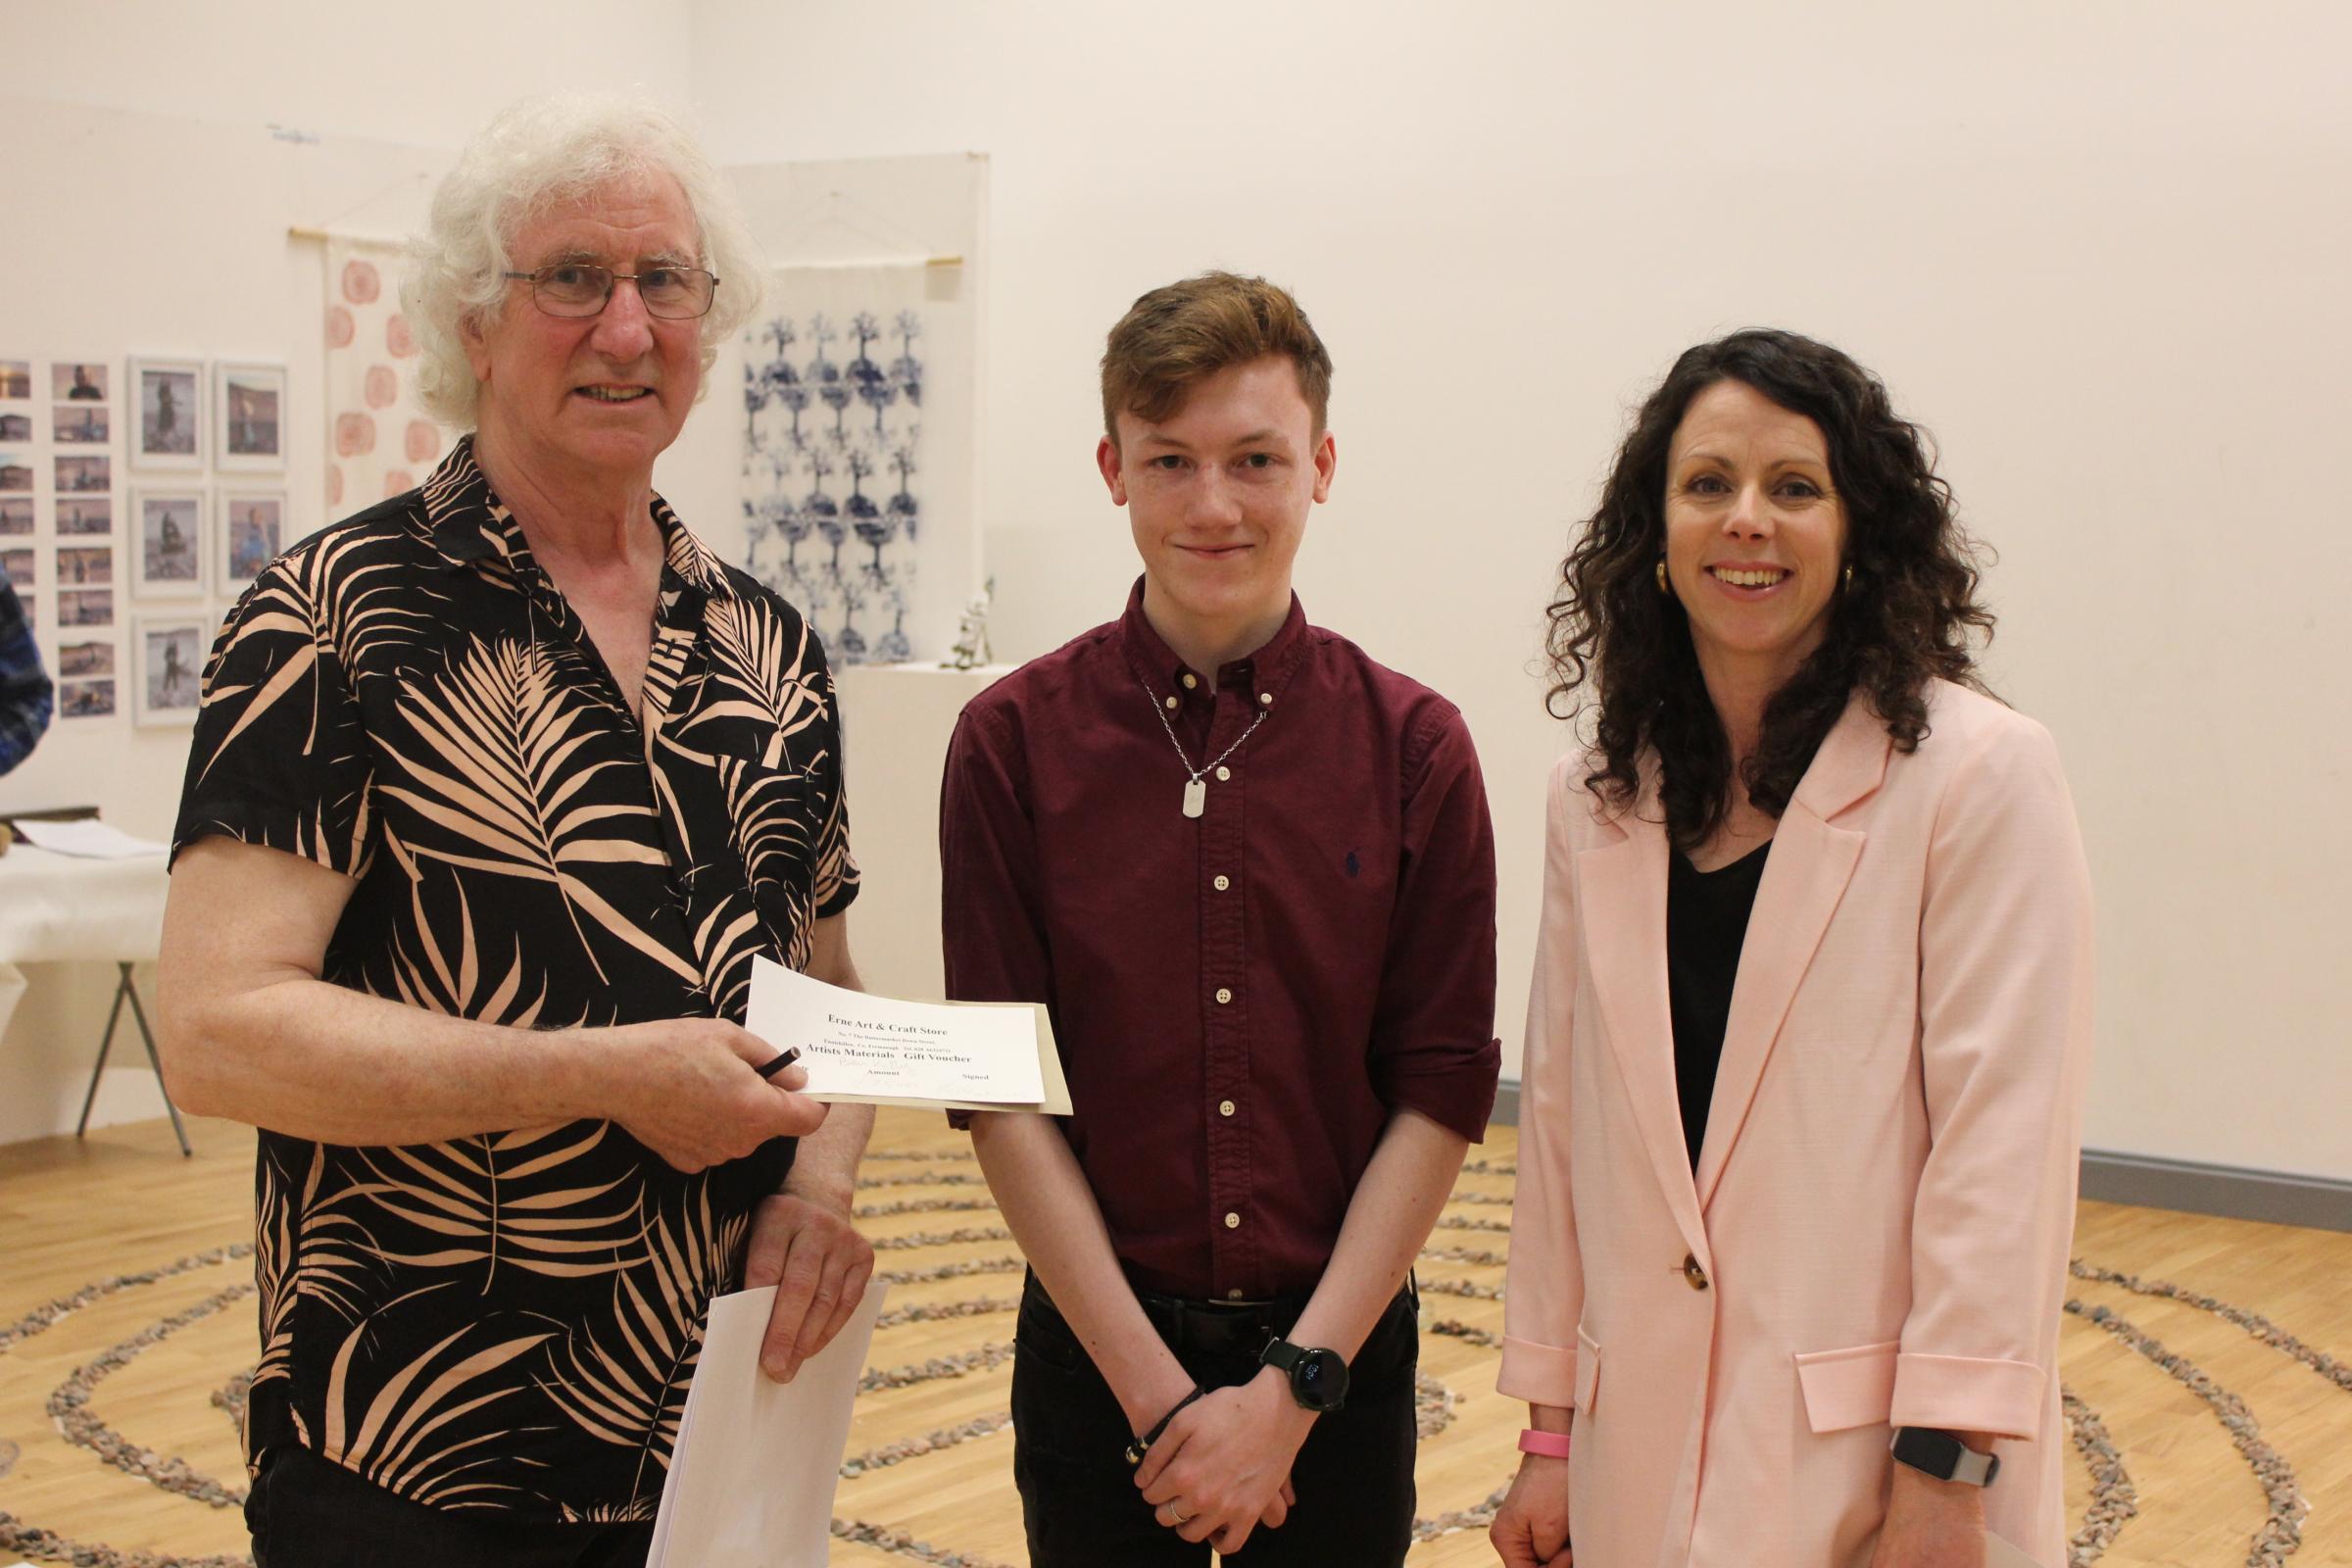  Ken Ramsey presents prize to student ?Ben Kelly for most innovative in show.